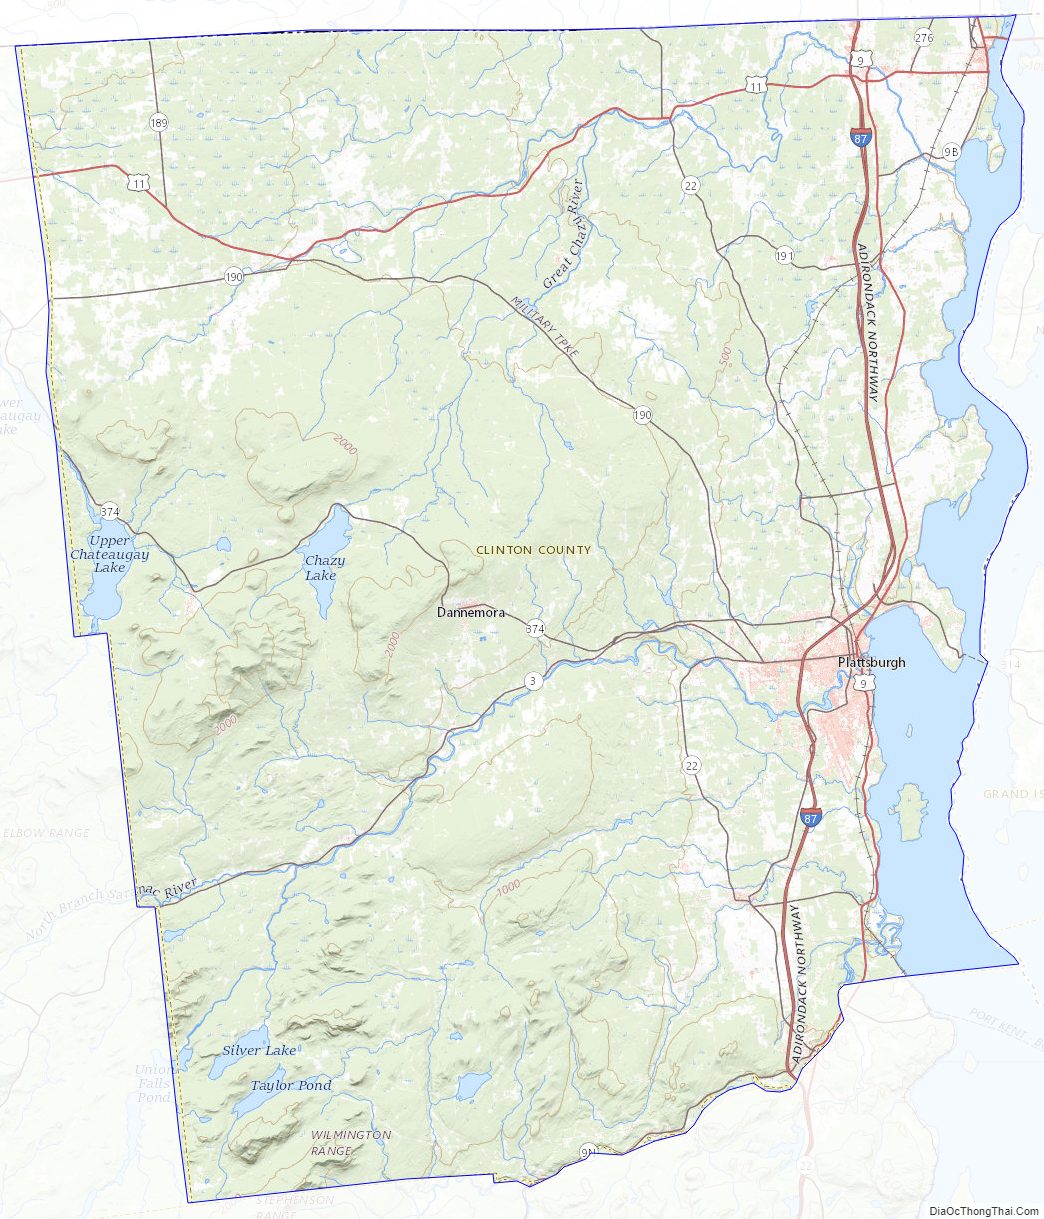 Topographic map of Clinton County, New York